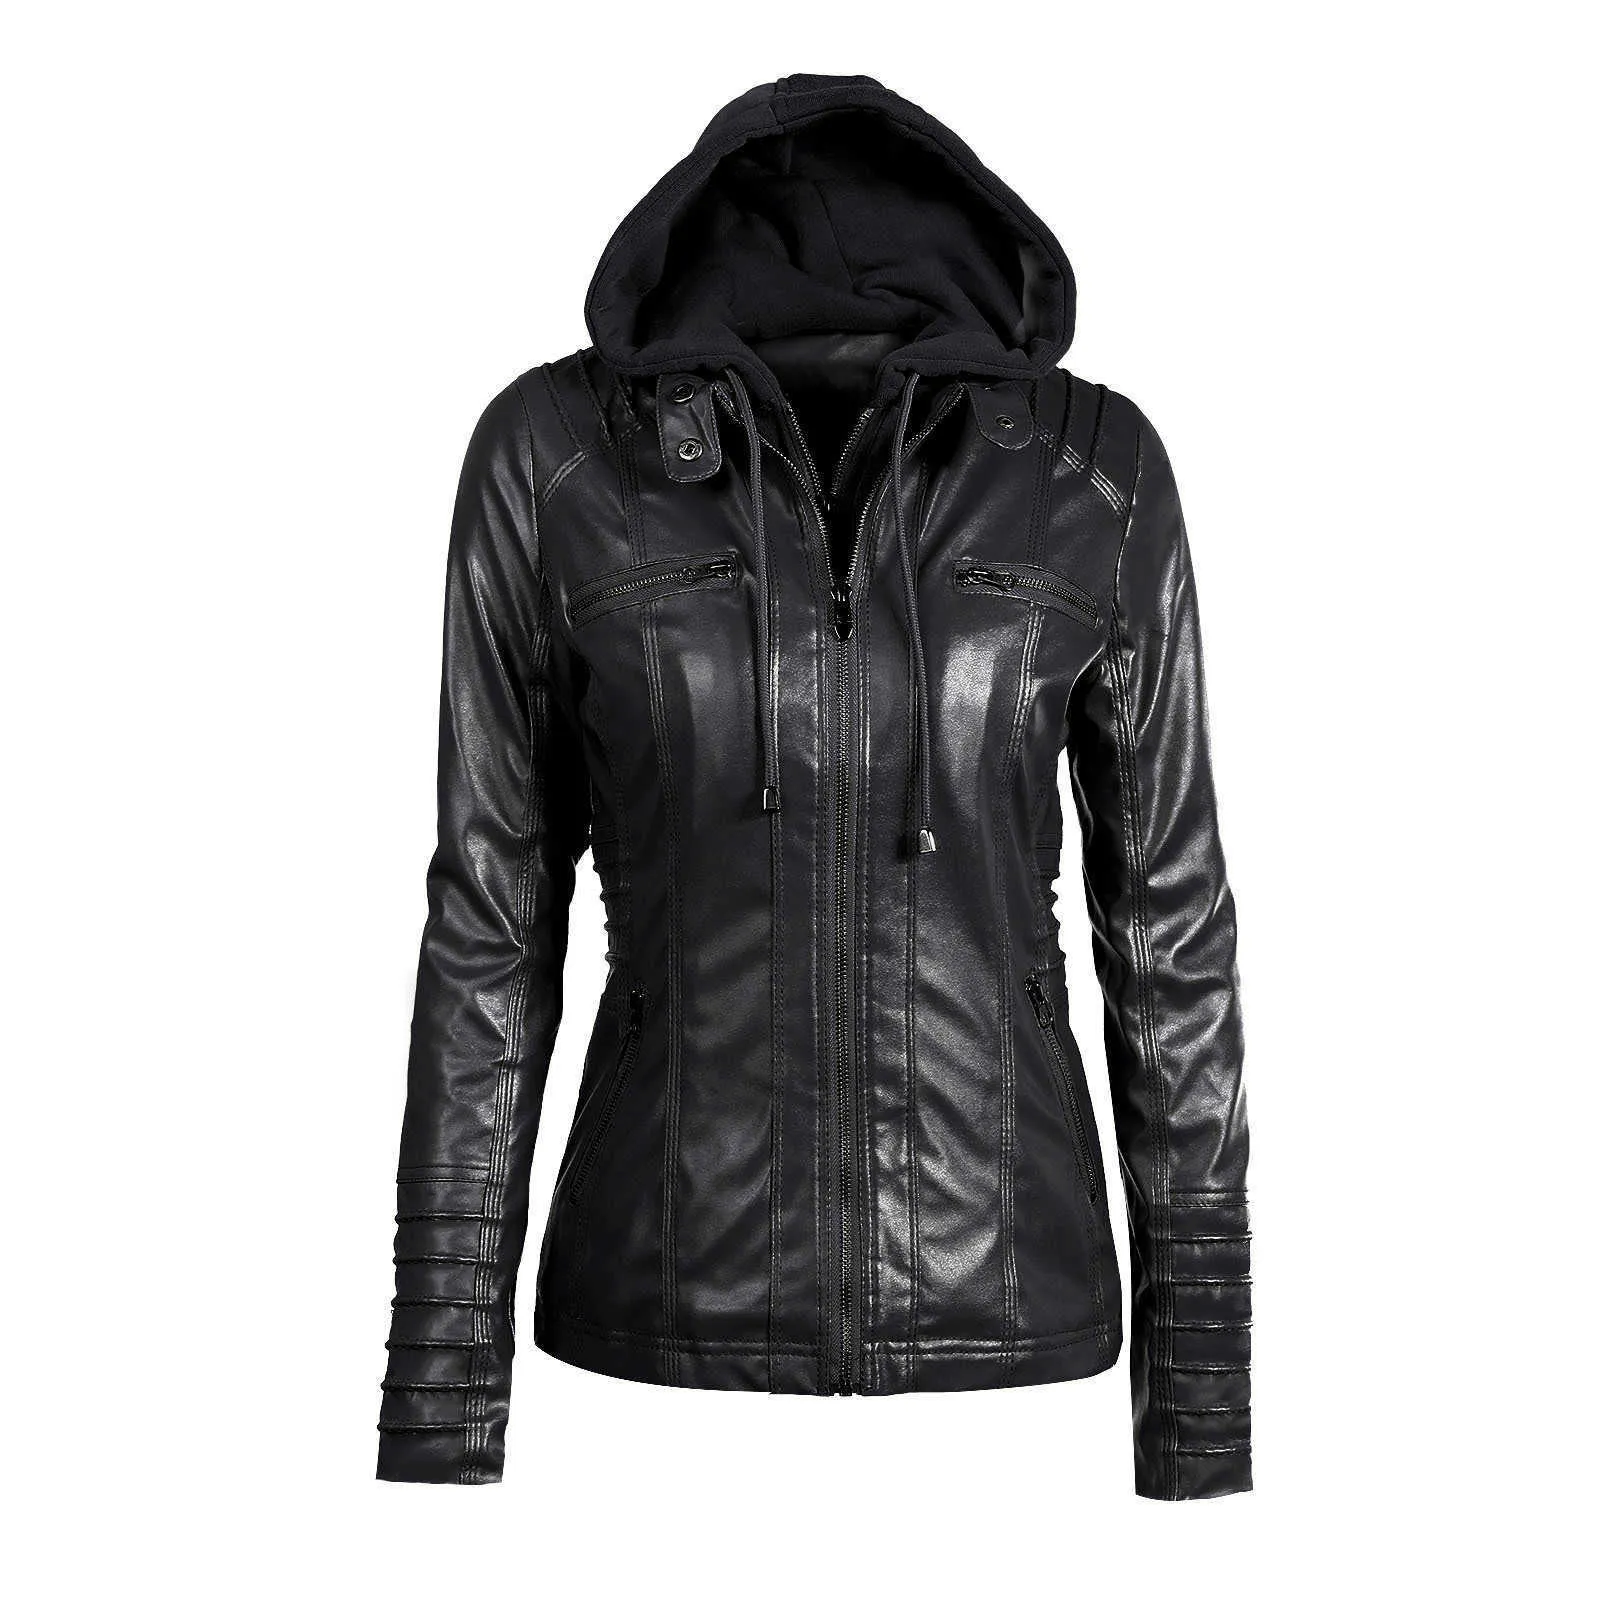 FTLZZ Women Faux Leather Jacket Pu Motorcycle Hooded Hat Detachable Casual Leather Plus Size 5xl Punk Outerwear 210916